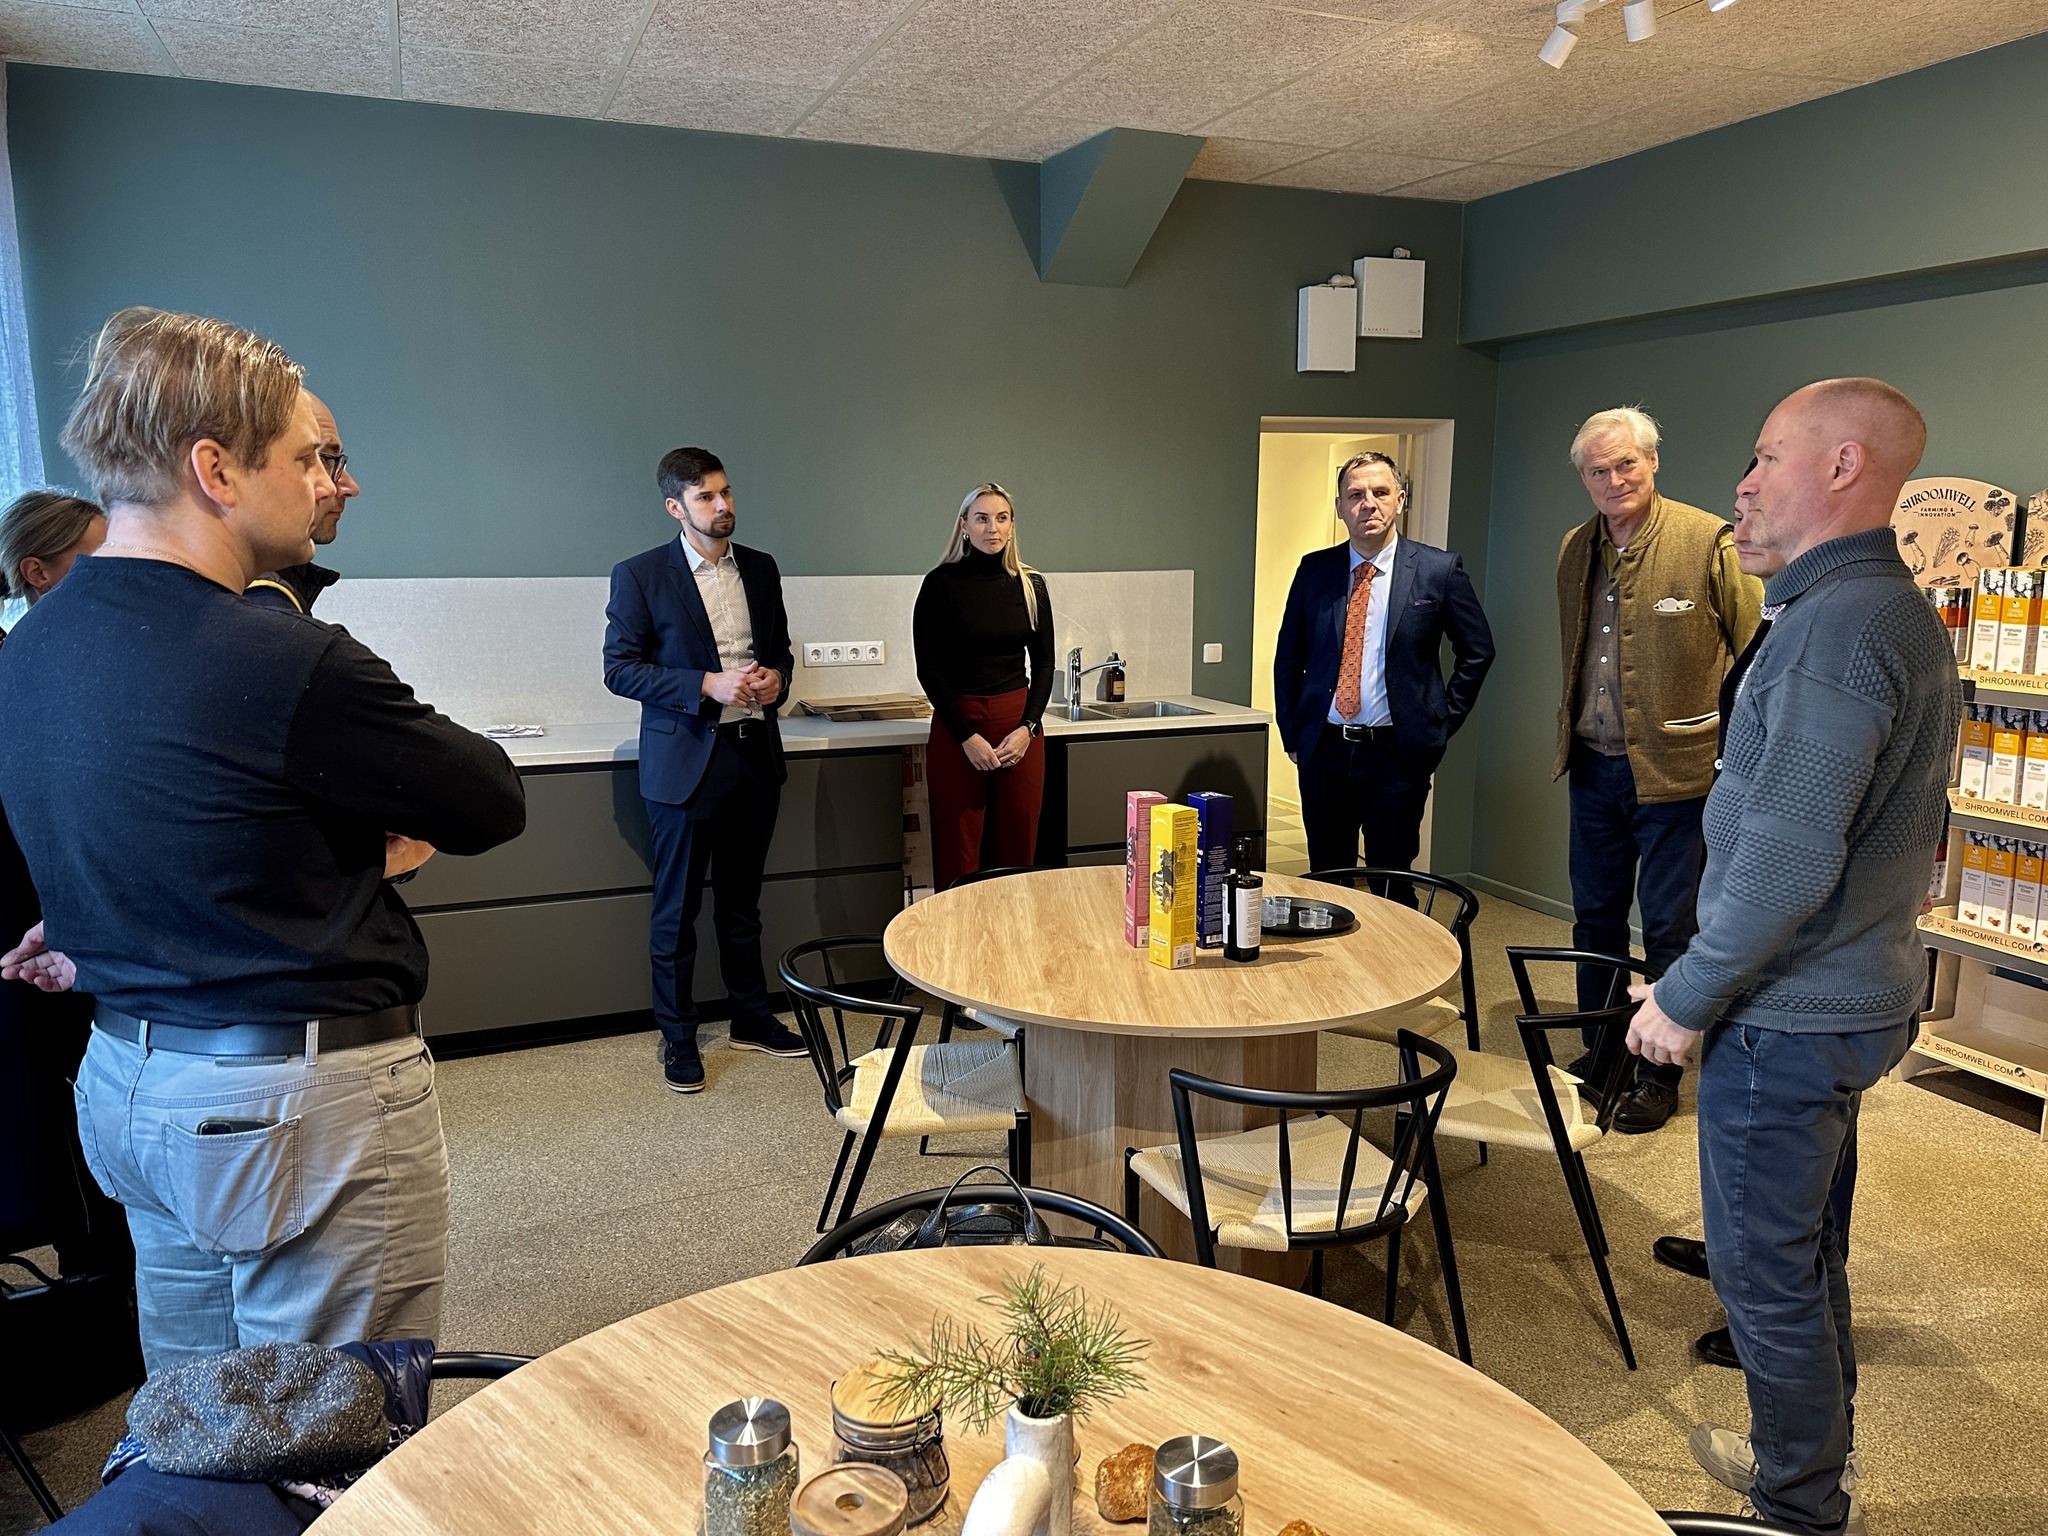 Gunther Pauli, globally renowned entrepreneur and author of the book 'The Blue Economy,' inspected the Shroomwell factory during his visit to Tõrva